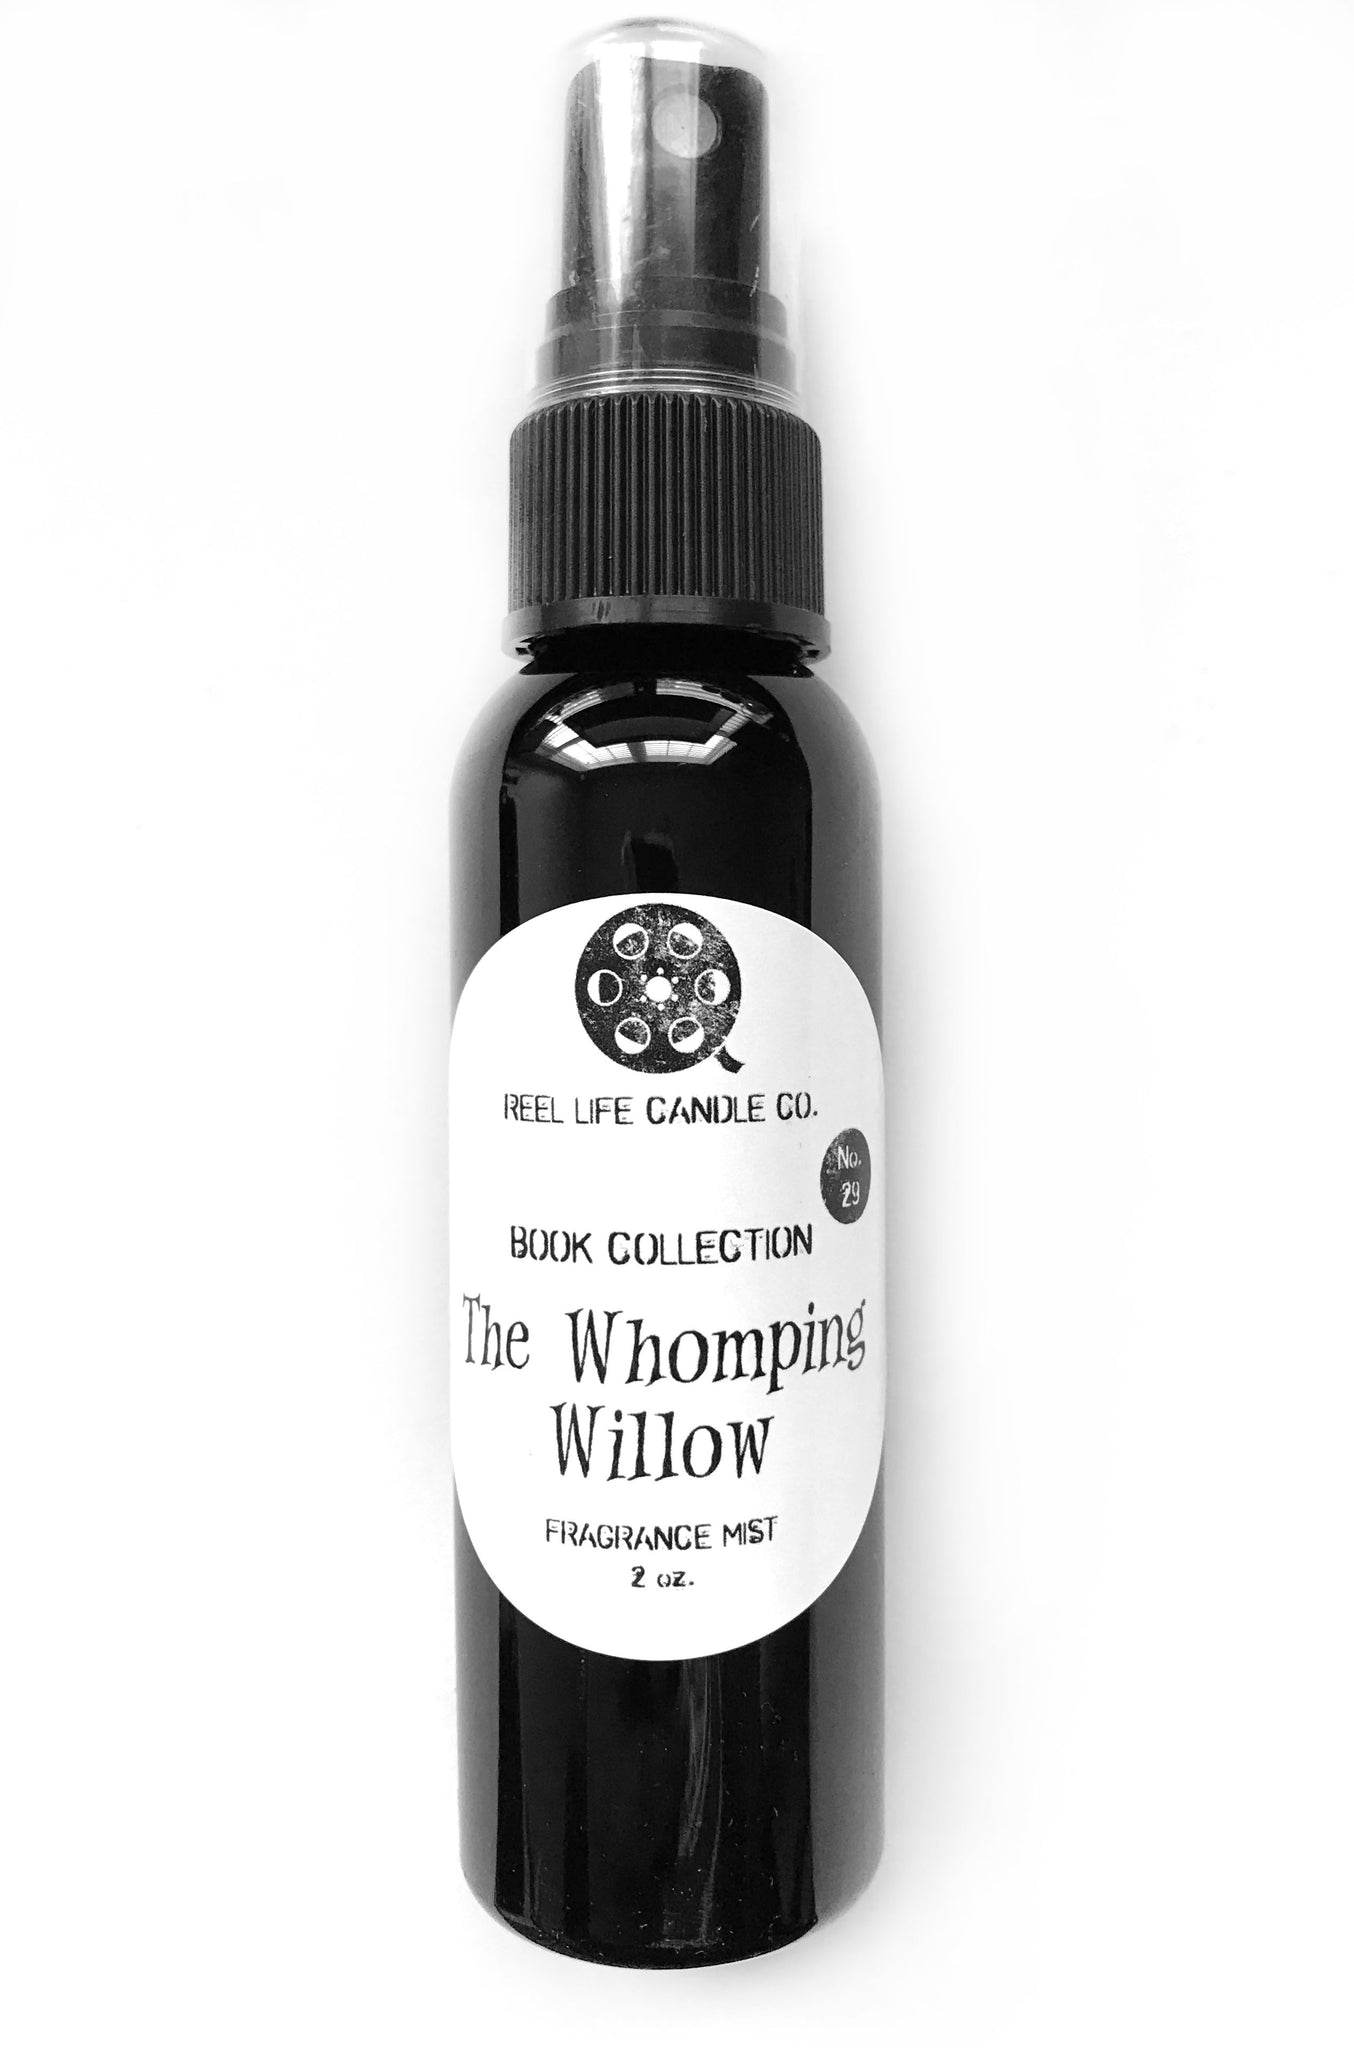 The Whomping Willow Fragrance Mist